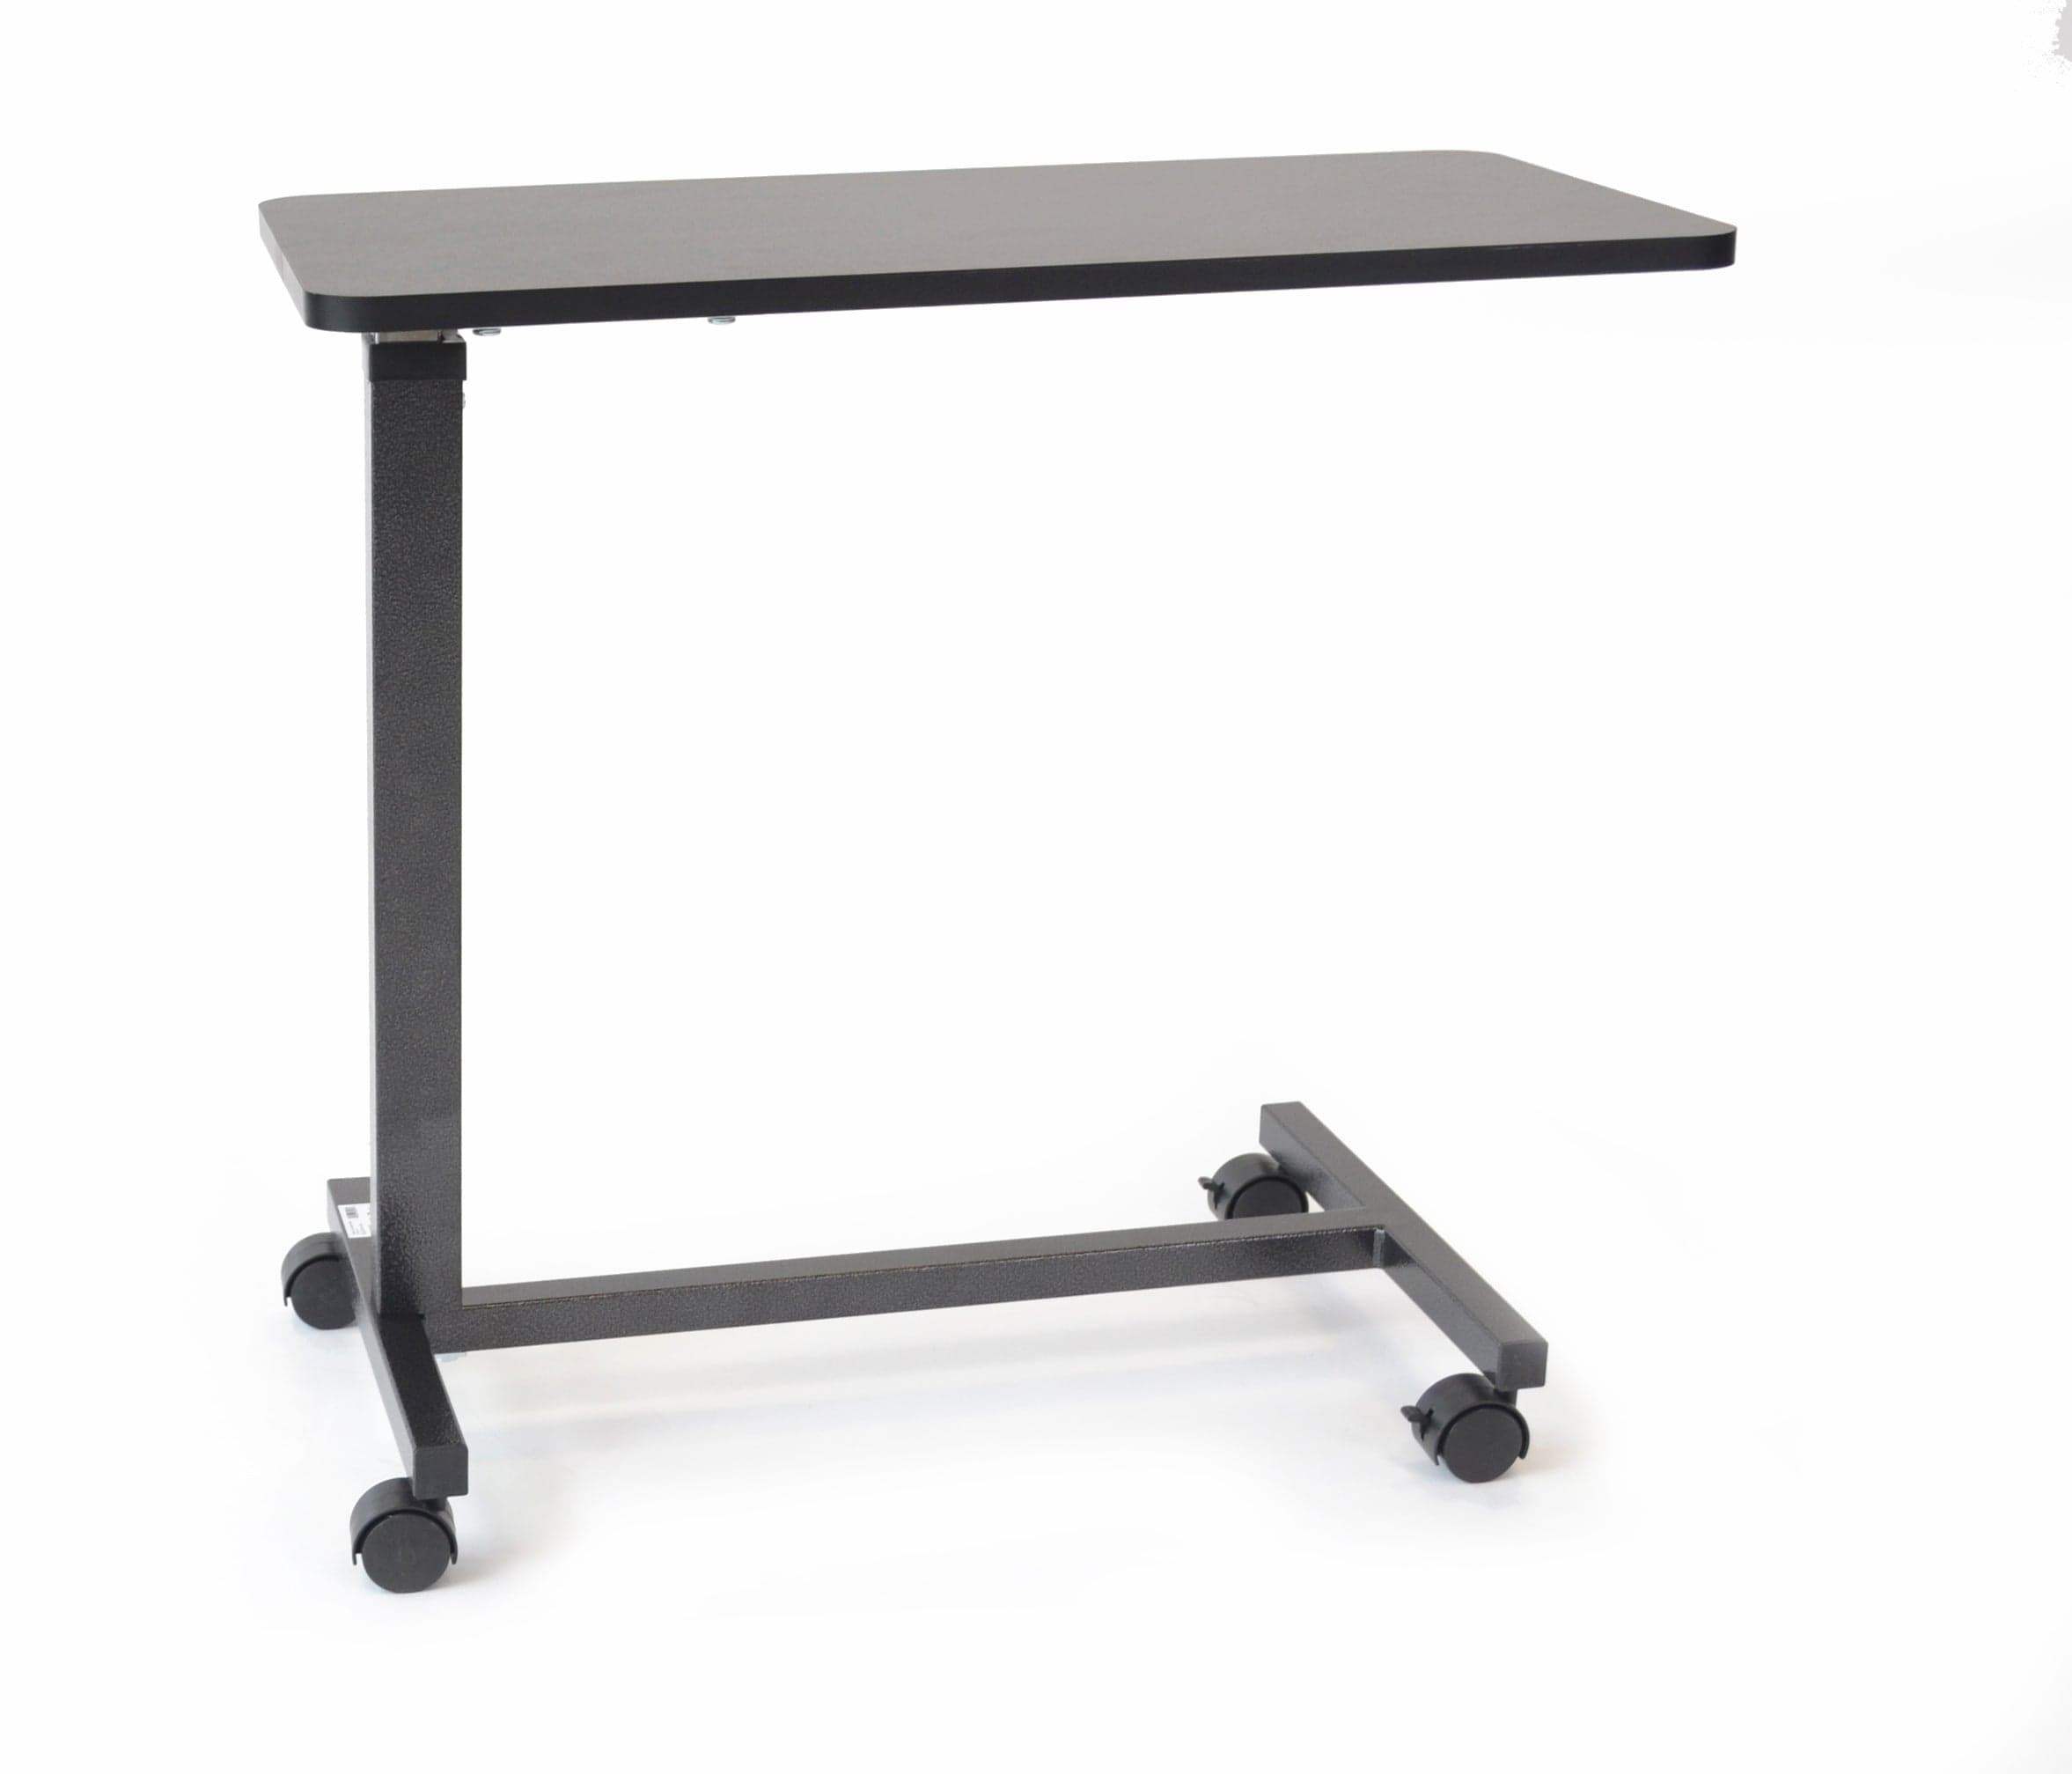 Compass Health Overbed Tables Compass Health Roscoe Overbed Table, Non-tilting Bedside Table